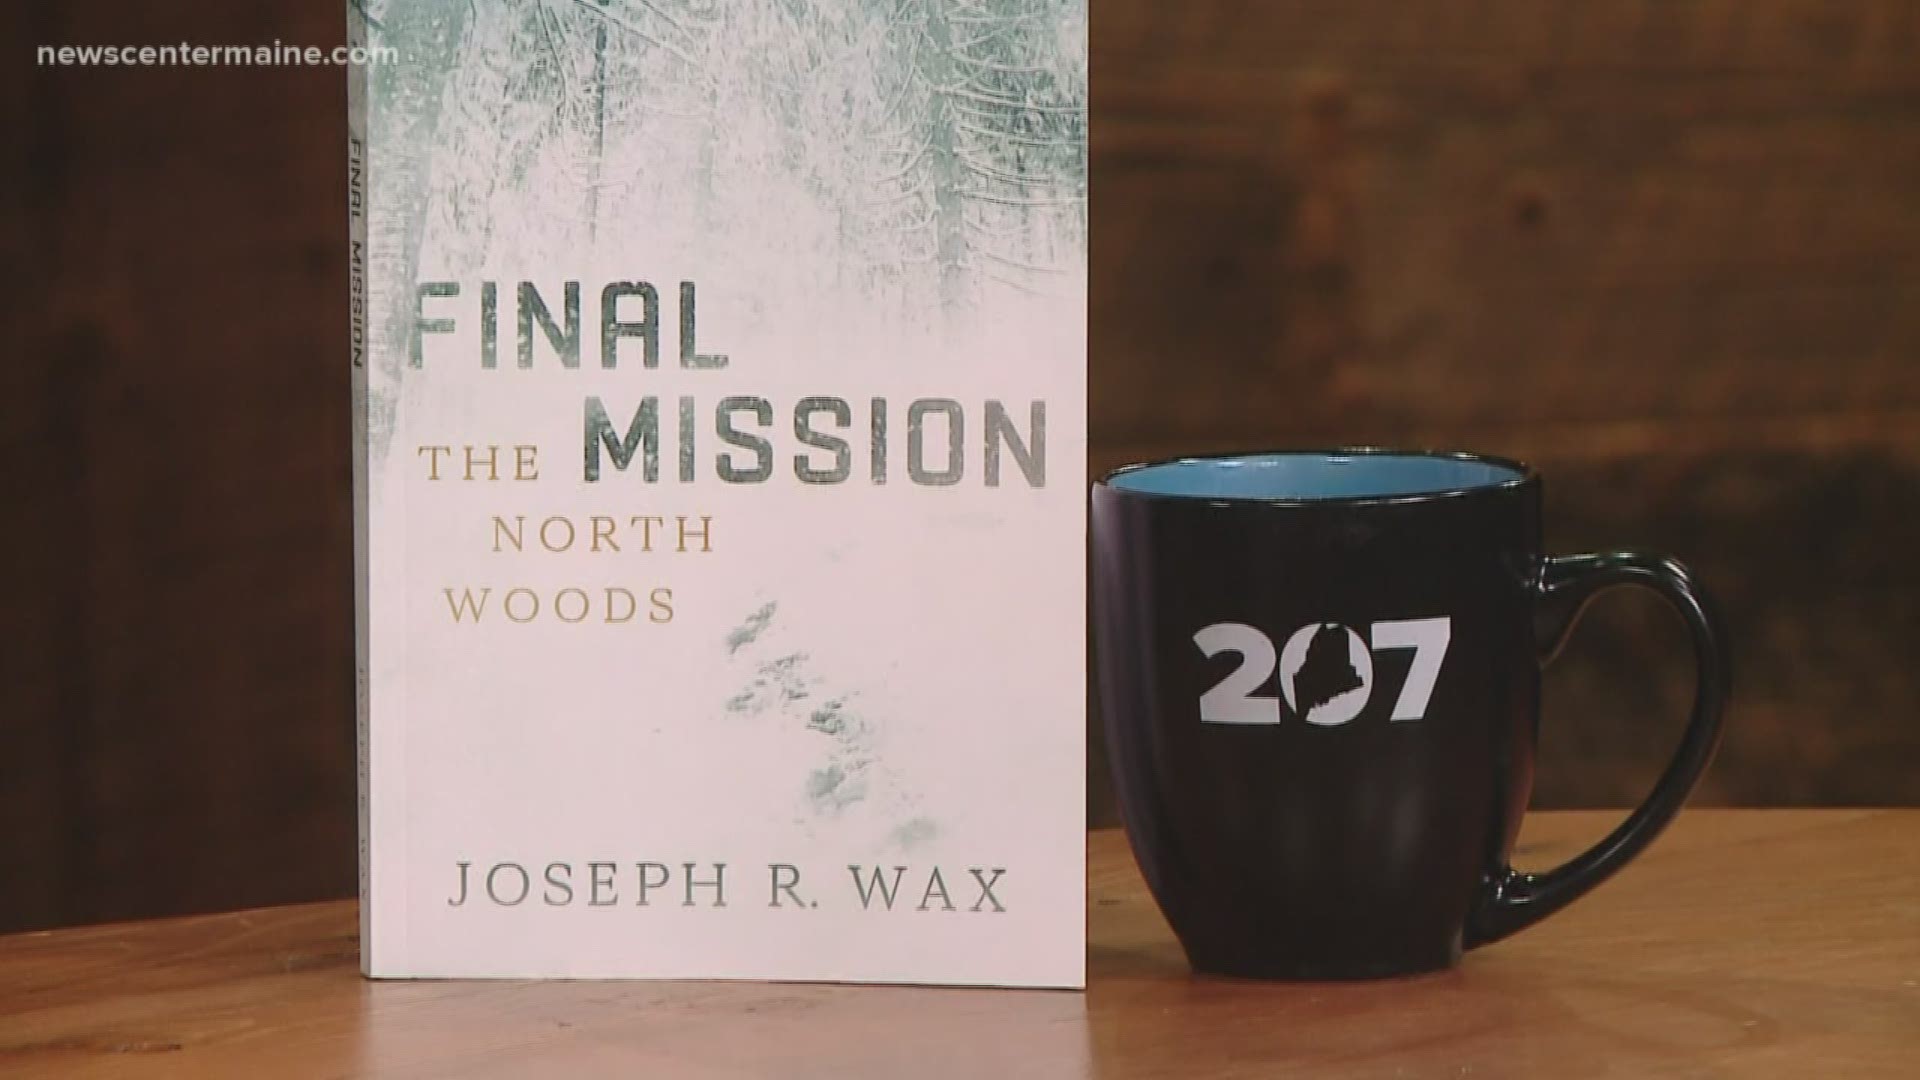 Author Joseph Wax details the crash of a B-52 military plane in the Maine woods.